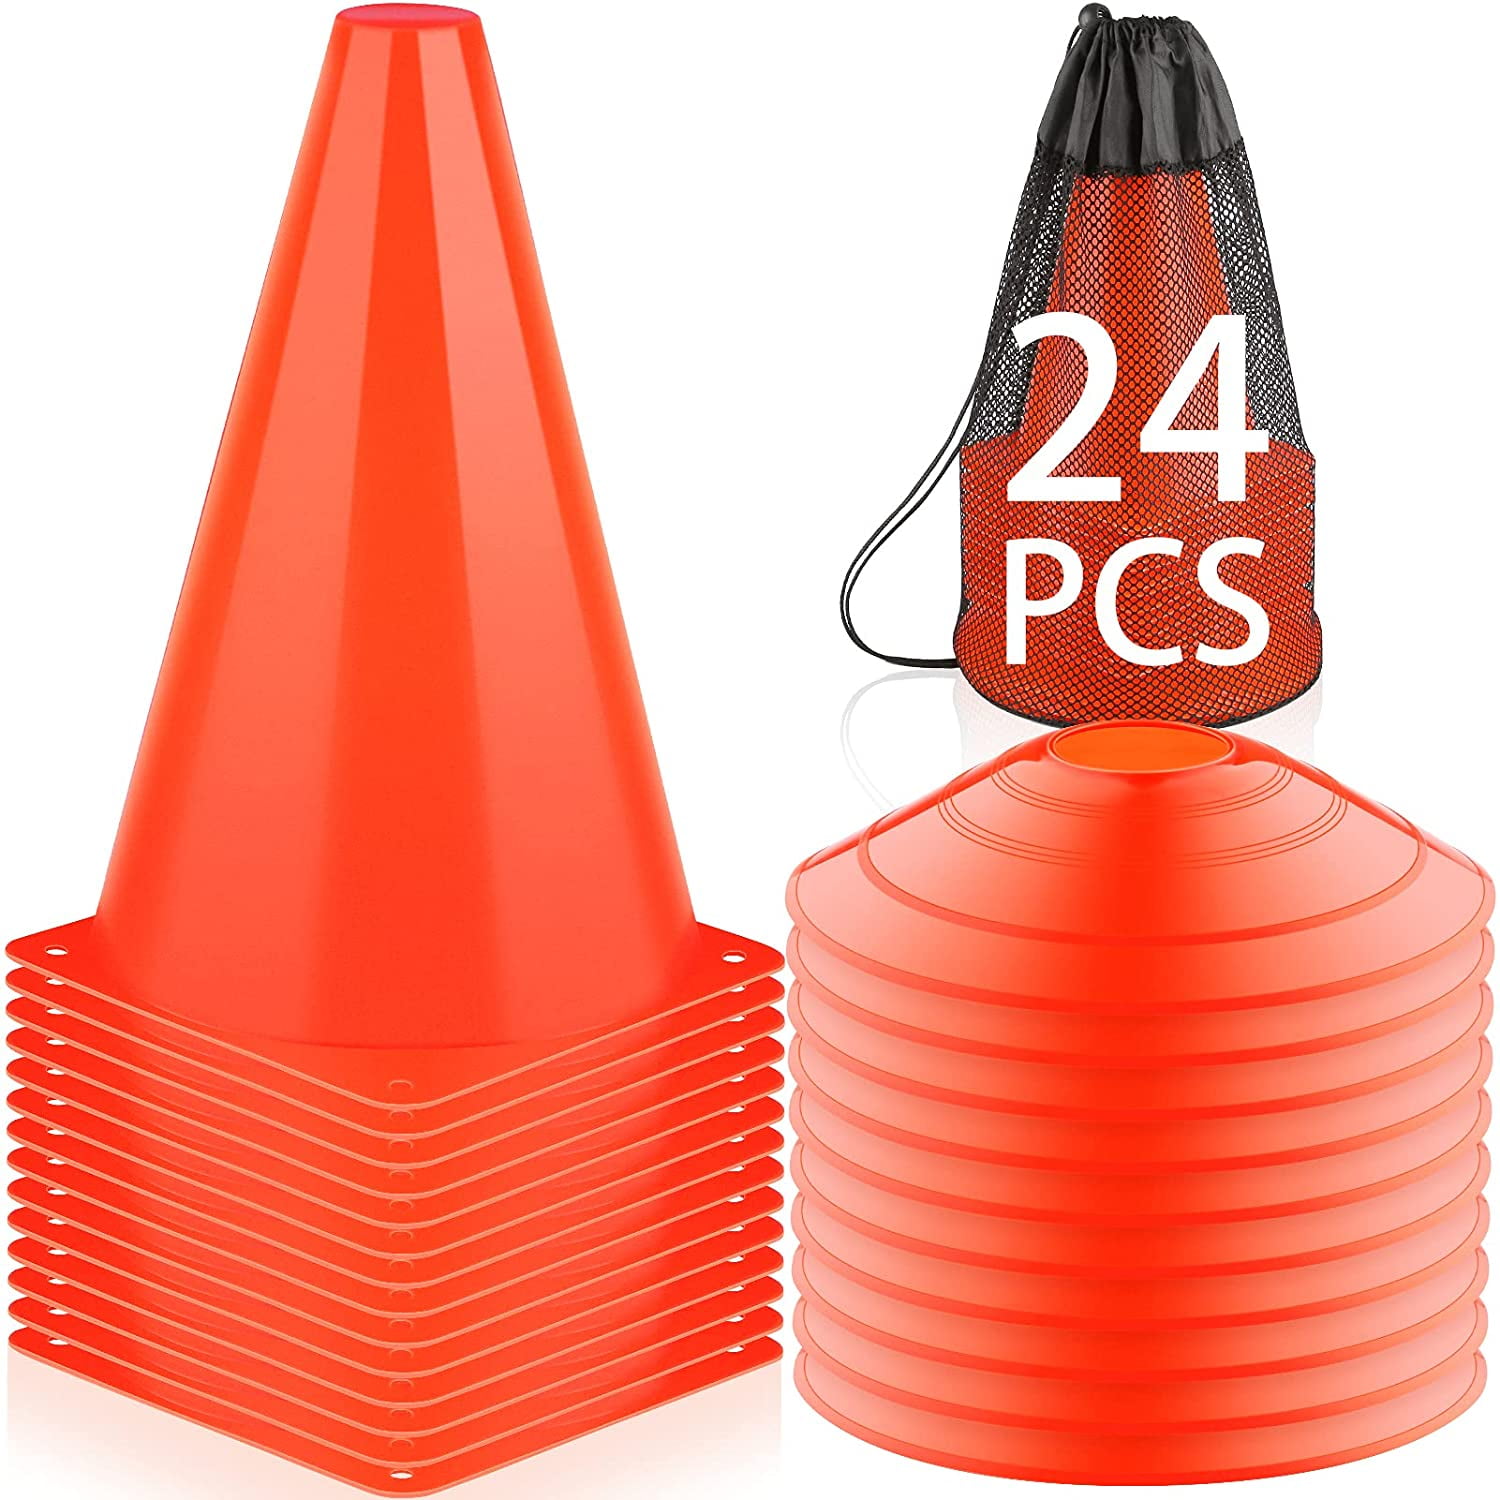 Quantity 10 9" Tall RED CONES Sports Training Safety Cones Go-Cart Slalom 